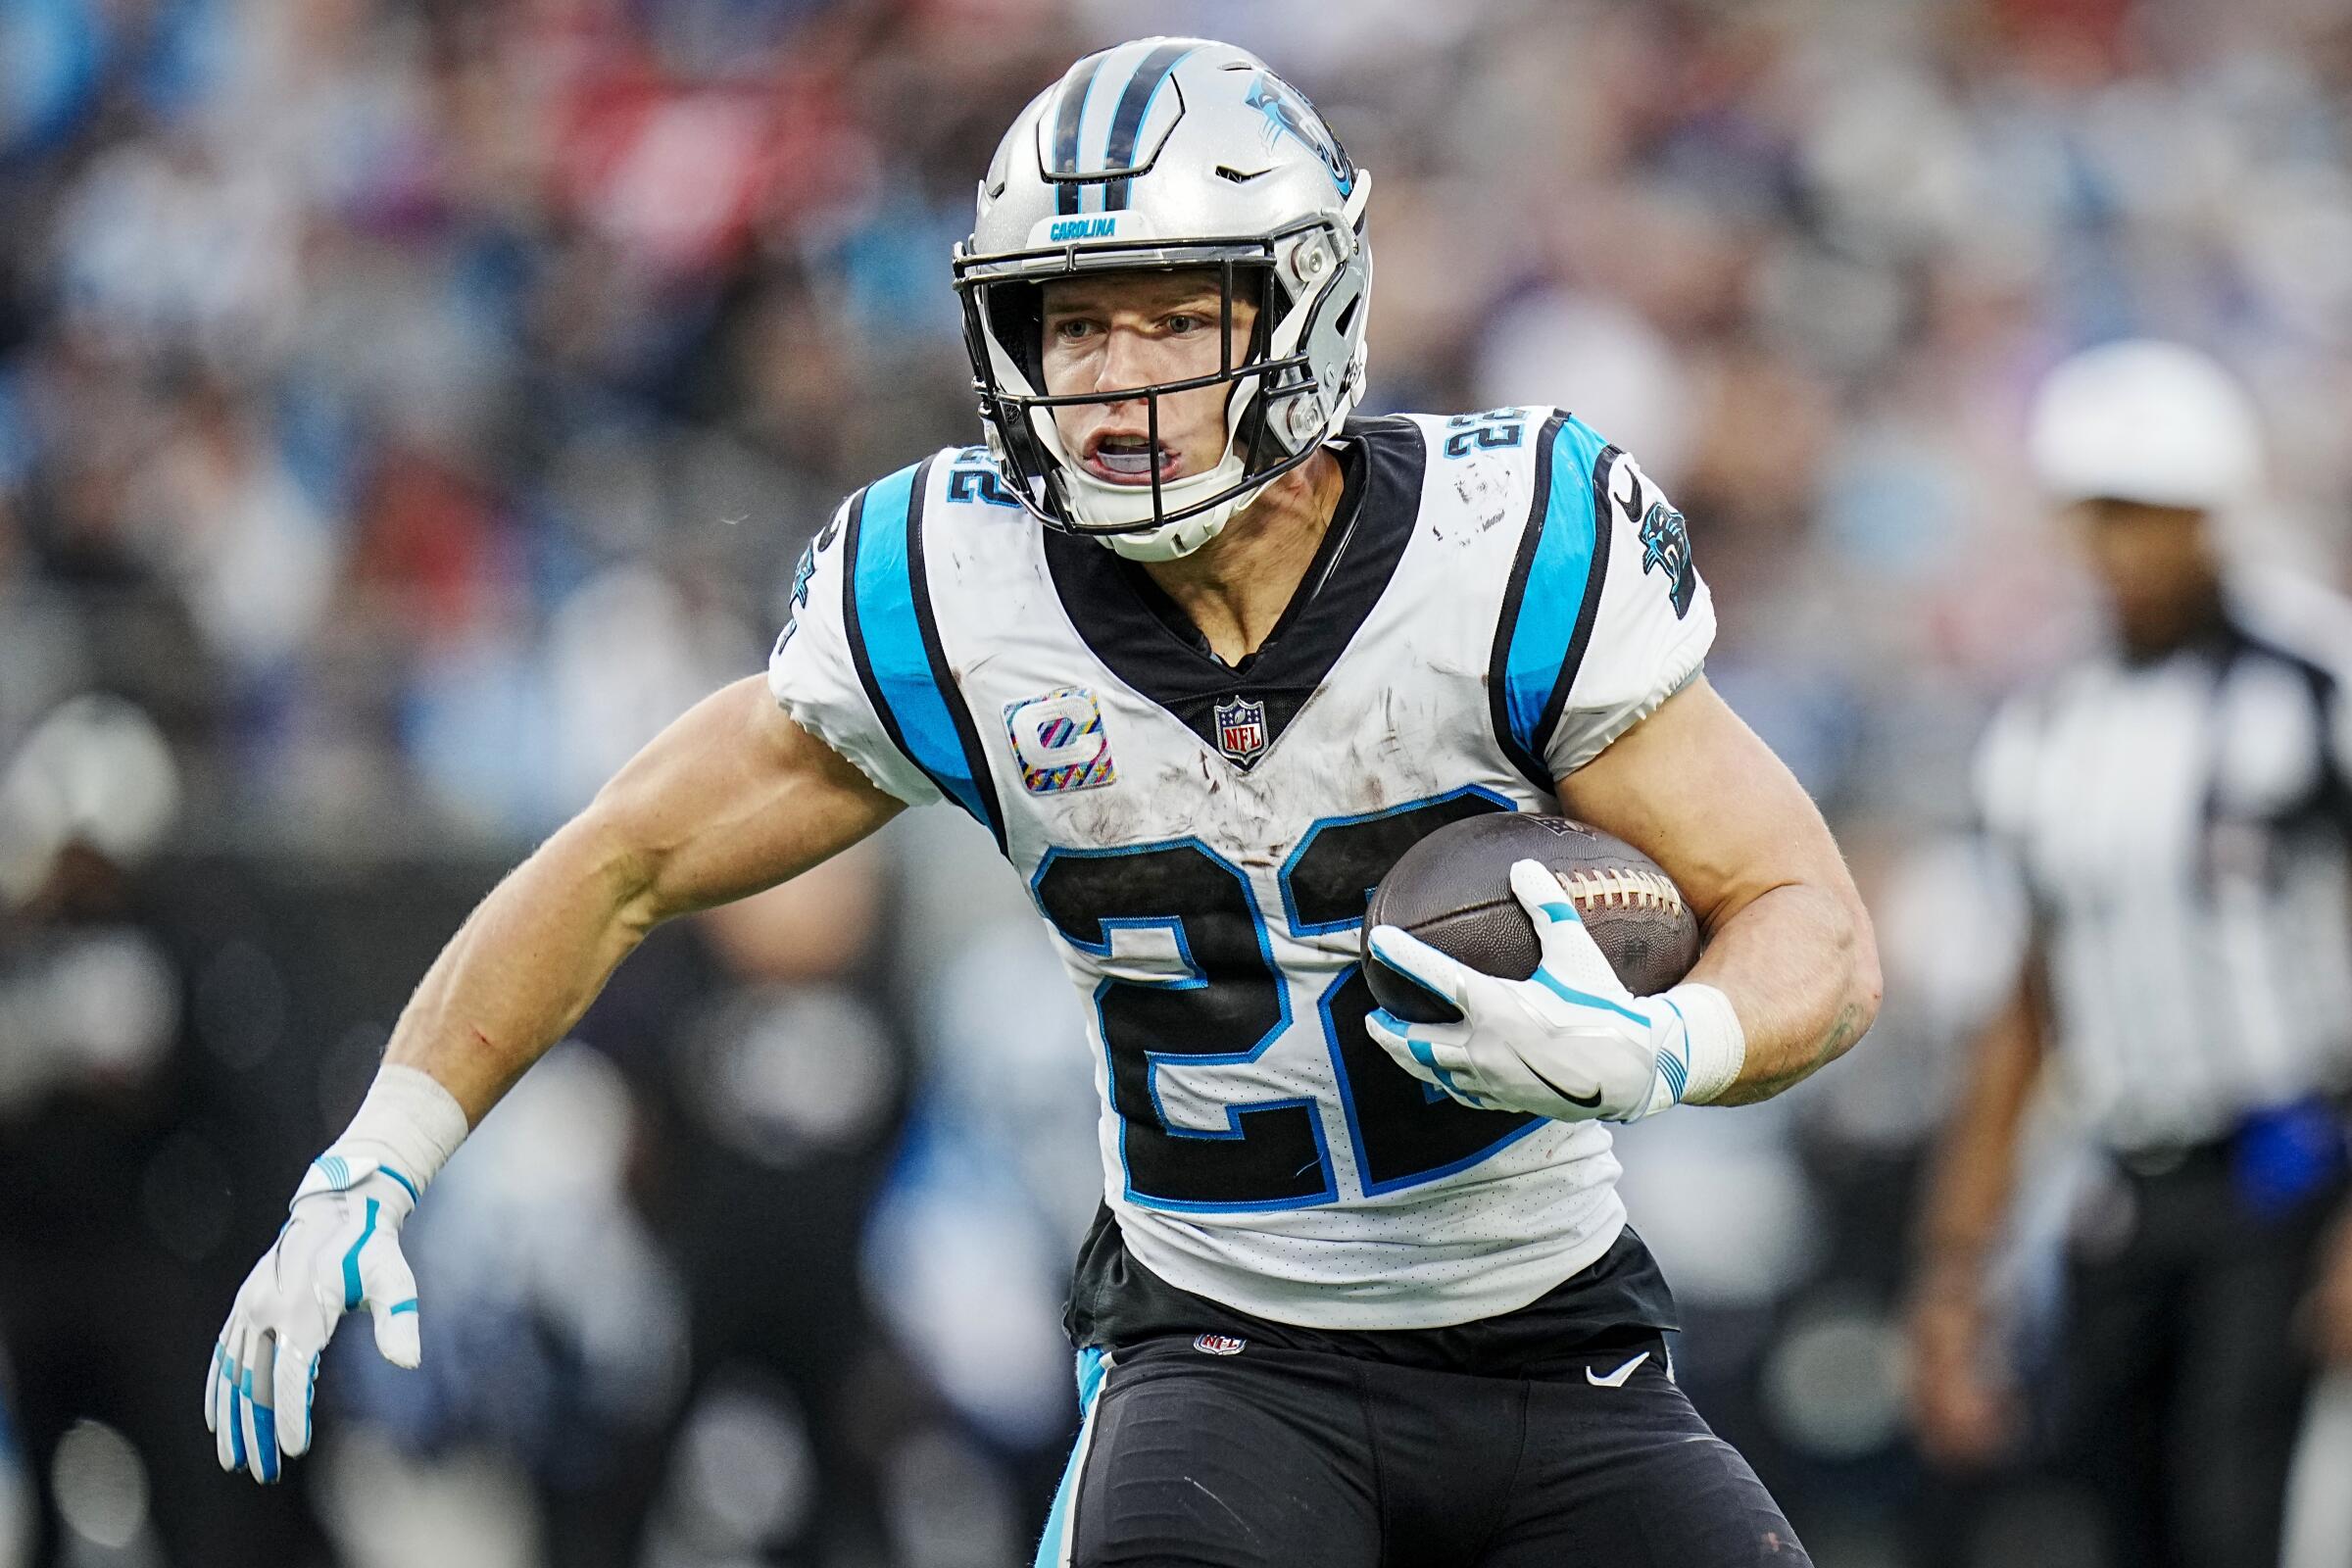 Carolina Panthers running back Christian McCaffrey carries the ball Oct. 9, 2022, against the San Francisco 49ers.